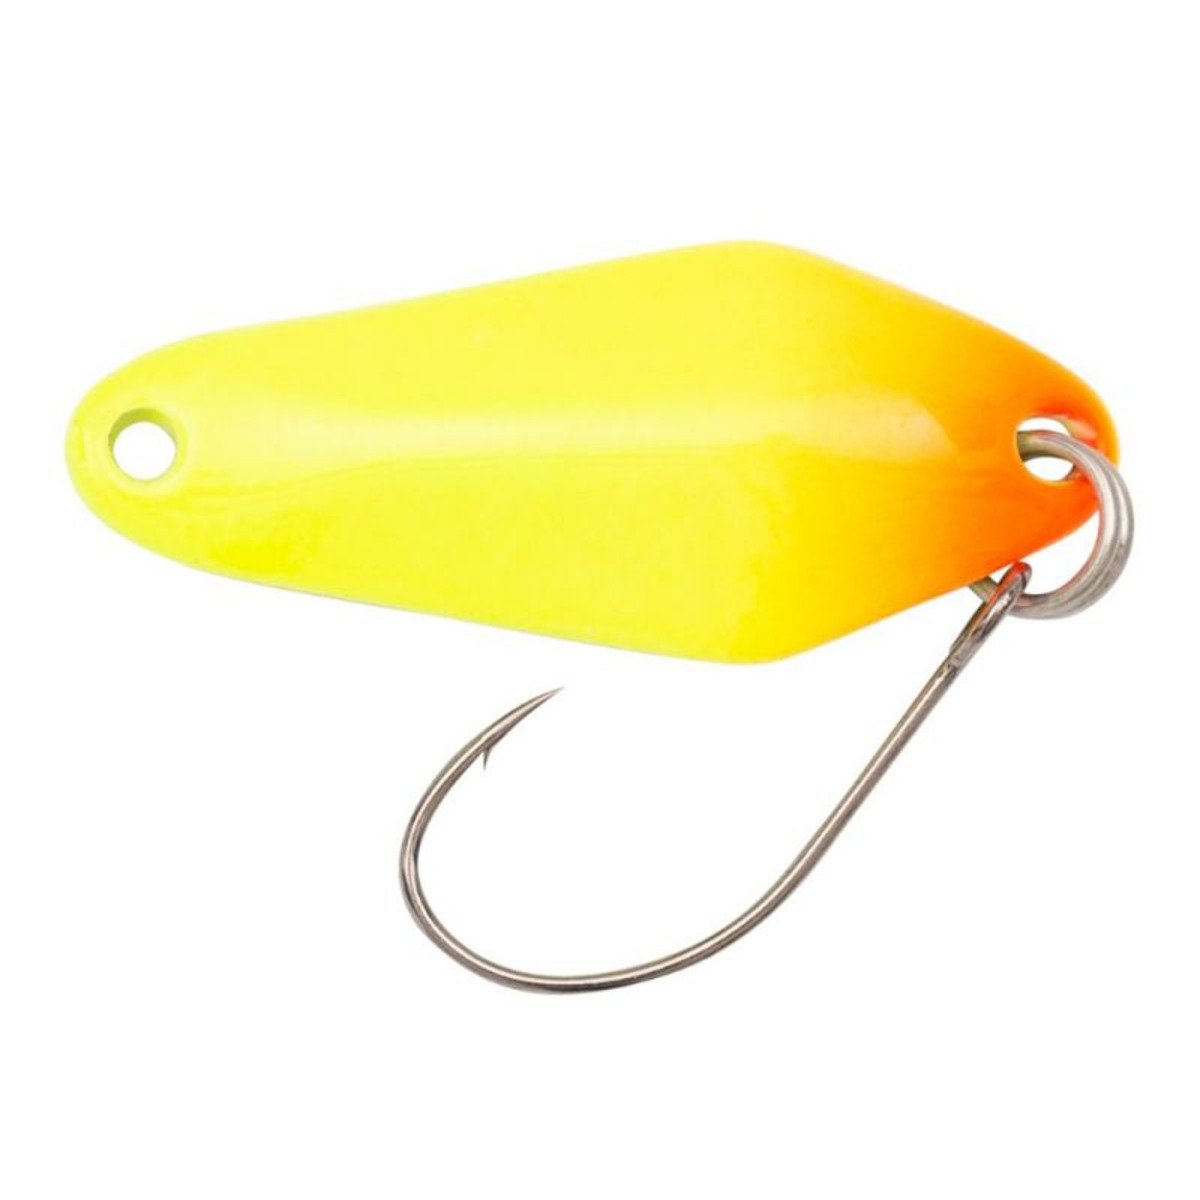 Berkley Area Game Spoons Chisai - 2.2 g - 2.5 cm - Orange Tip-Chartreuse-Gold